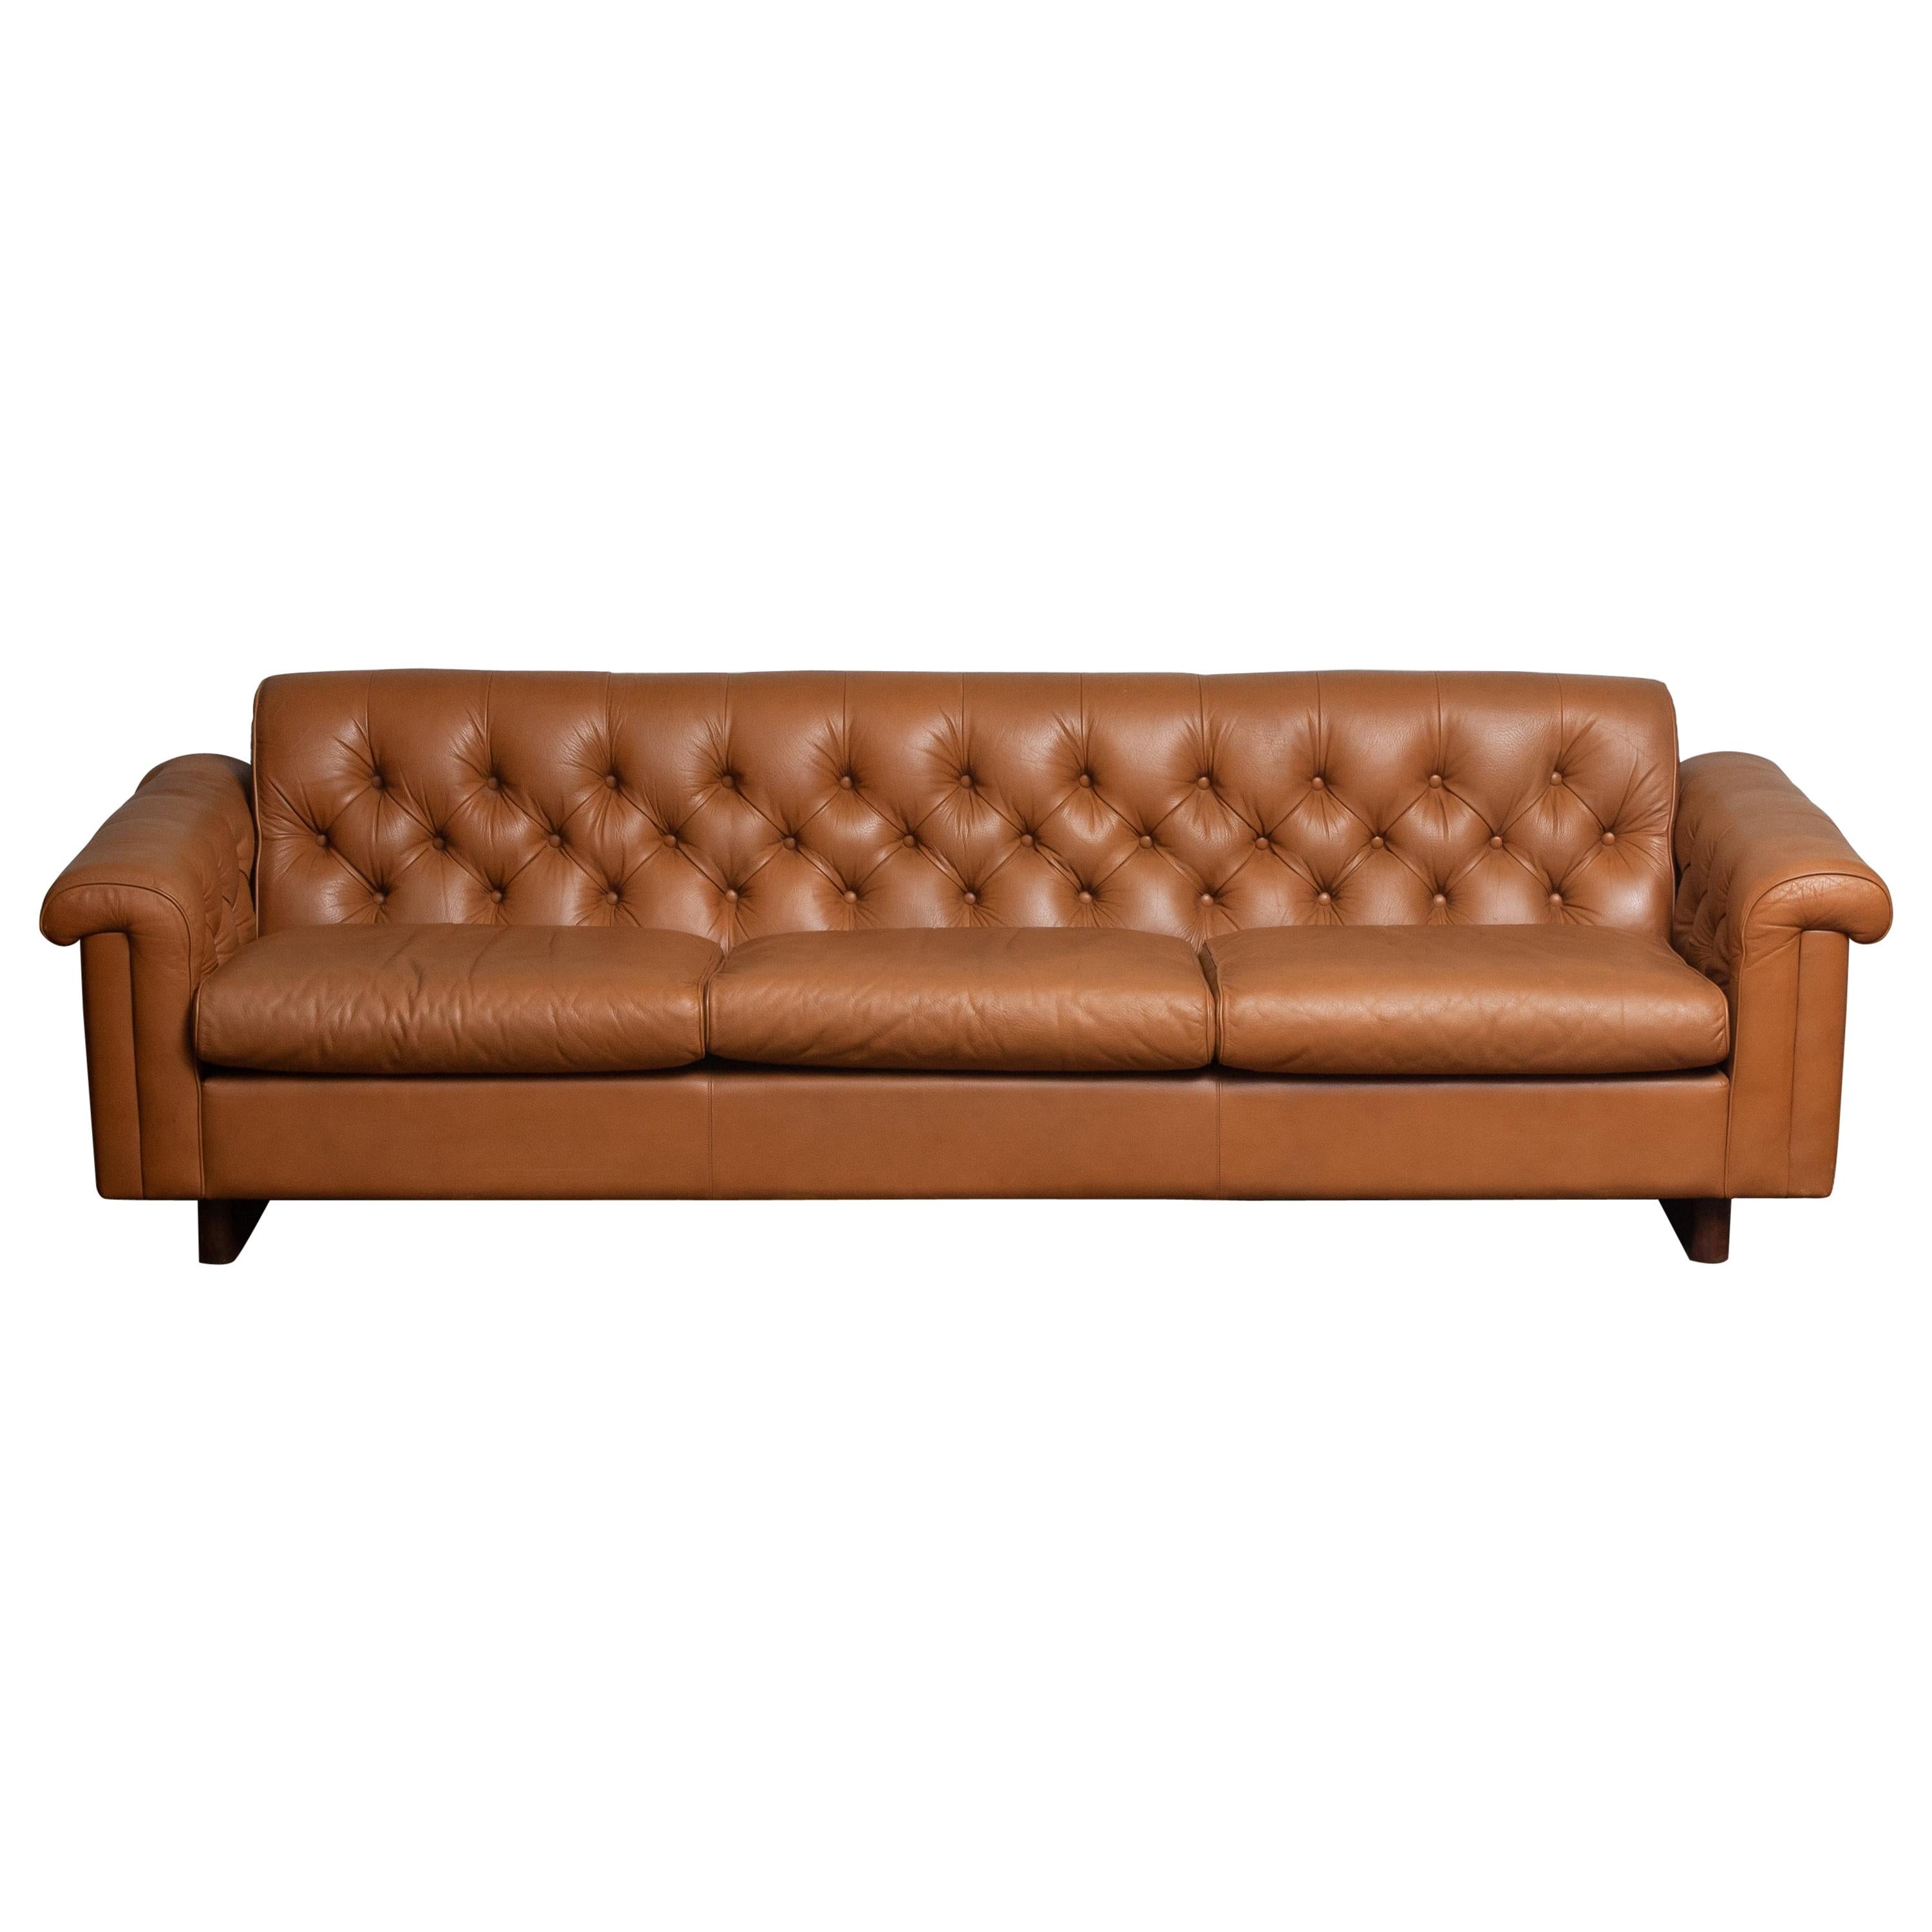 Absolutely rare and beautiful ( Chesterfield model ) sofa in camel color tufted leather from the second half of the 70's designed by Karl Erik Ekselius for JOC Design Vetlanda in Sweden. (Labeled)
This sofa feels soft and sits extremely